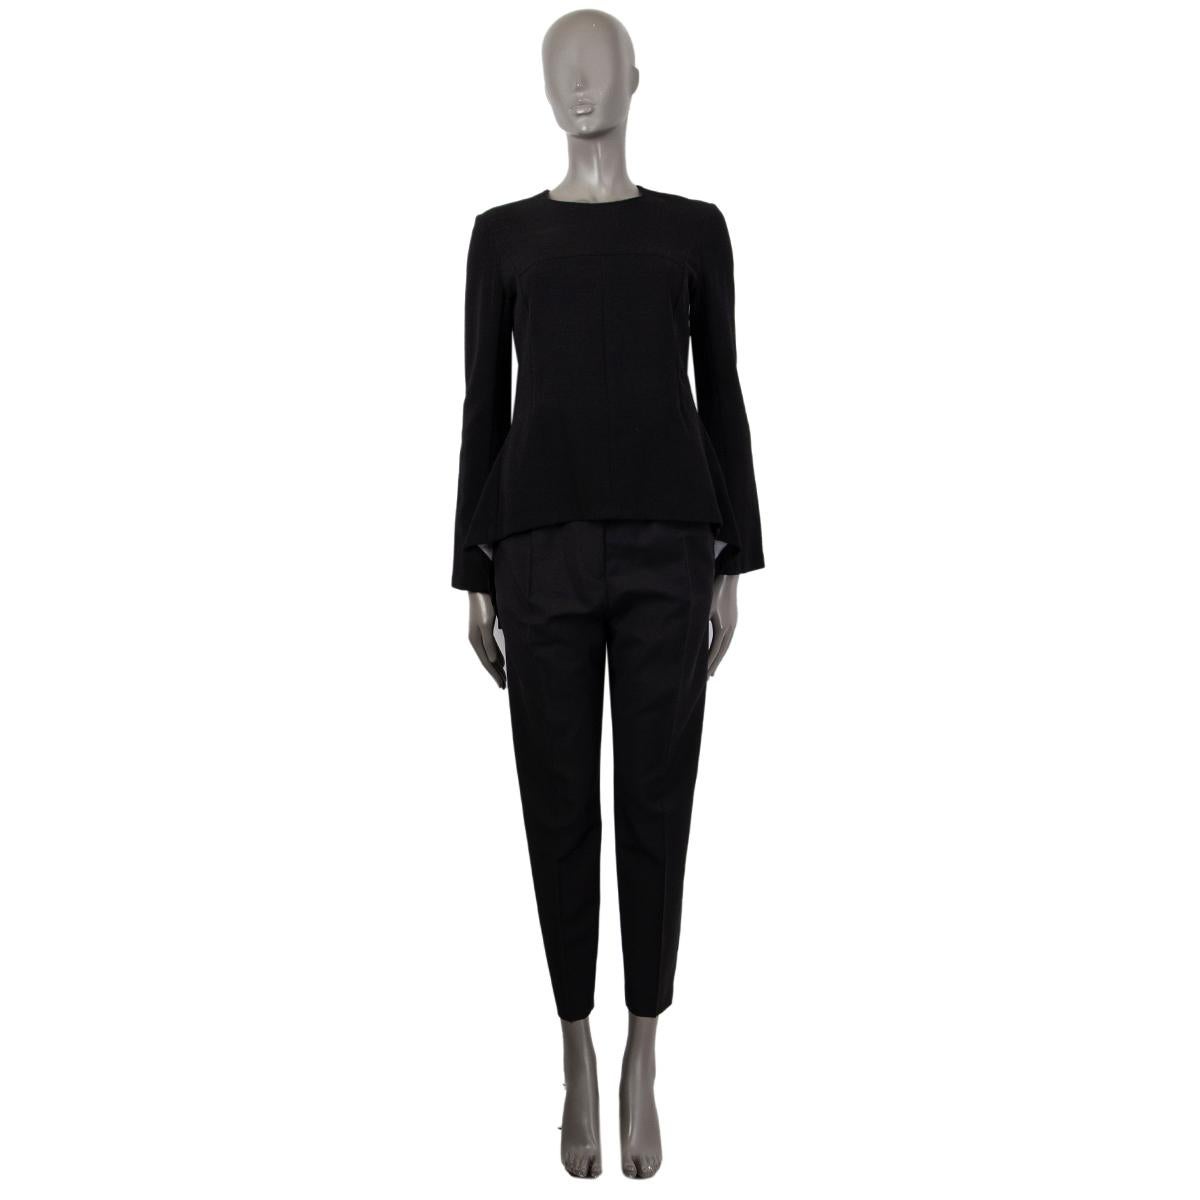 100% authentic Stella McCartney flared long-sleeve blouse in black wool (96%) and elastane (4%). Opens with a zipper on the back. Has been worn and is in excellent condition. 

Measurements
Tag Size	40
Size	S
Shoulder Width	40cm (15.6in)
Bust